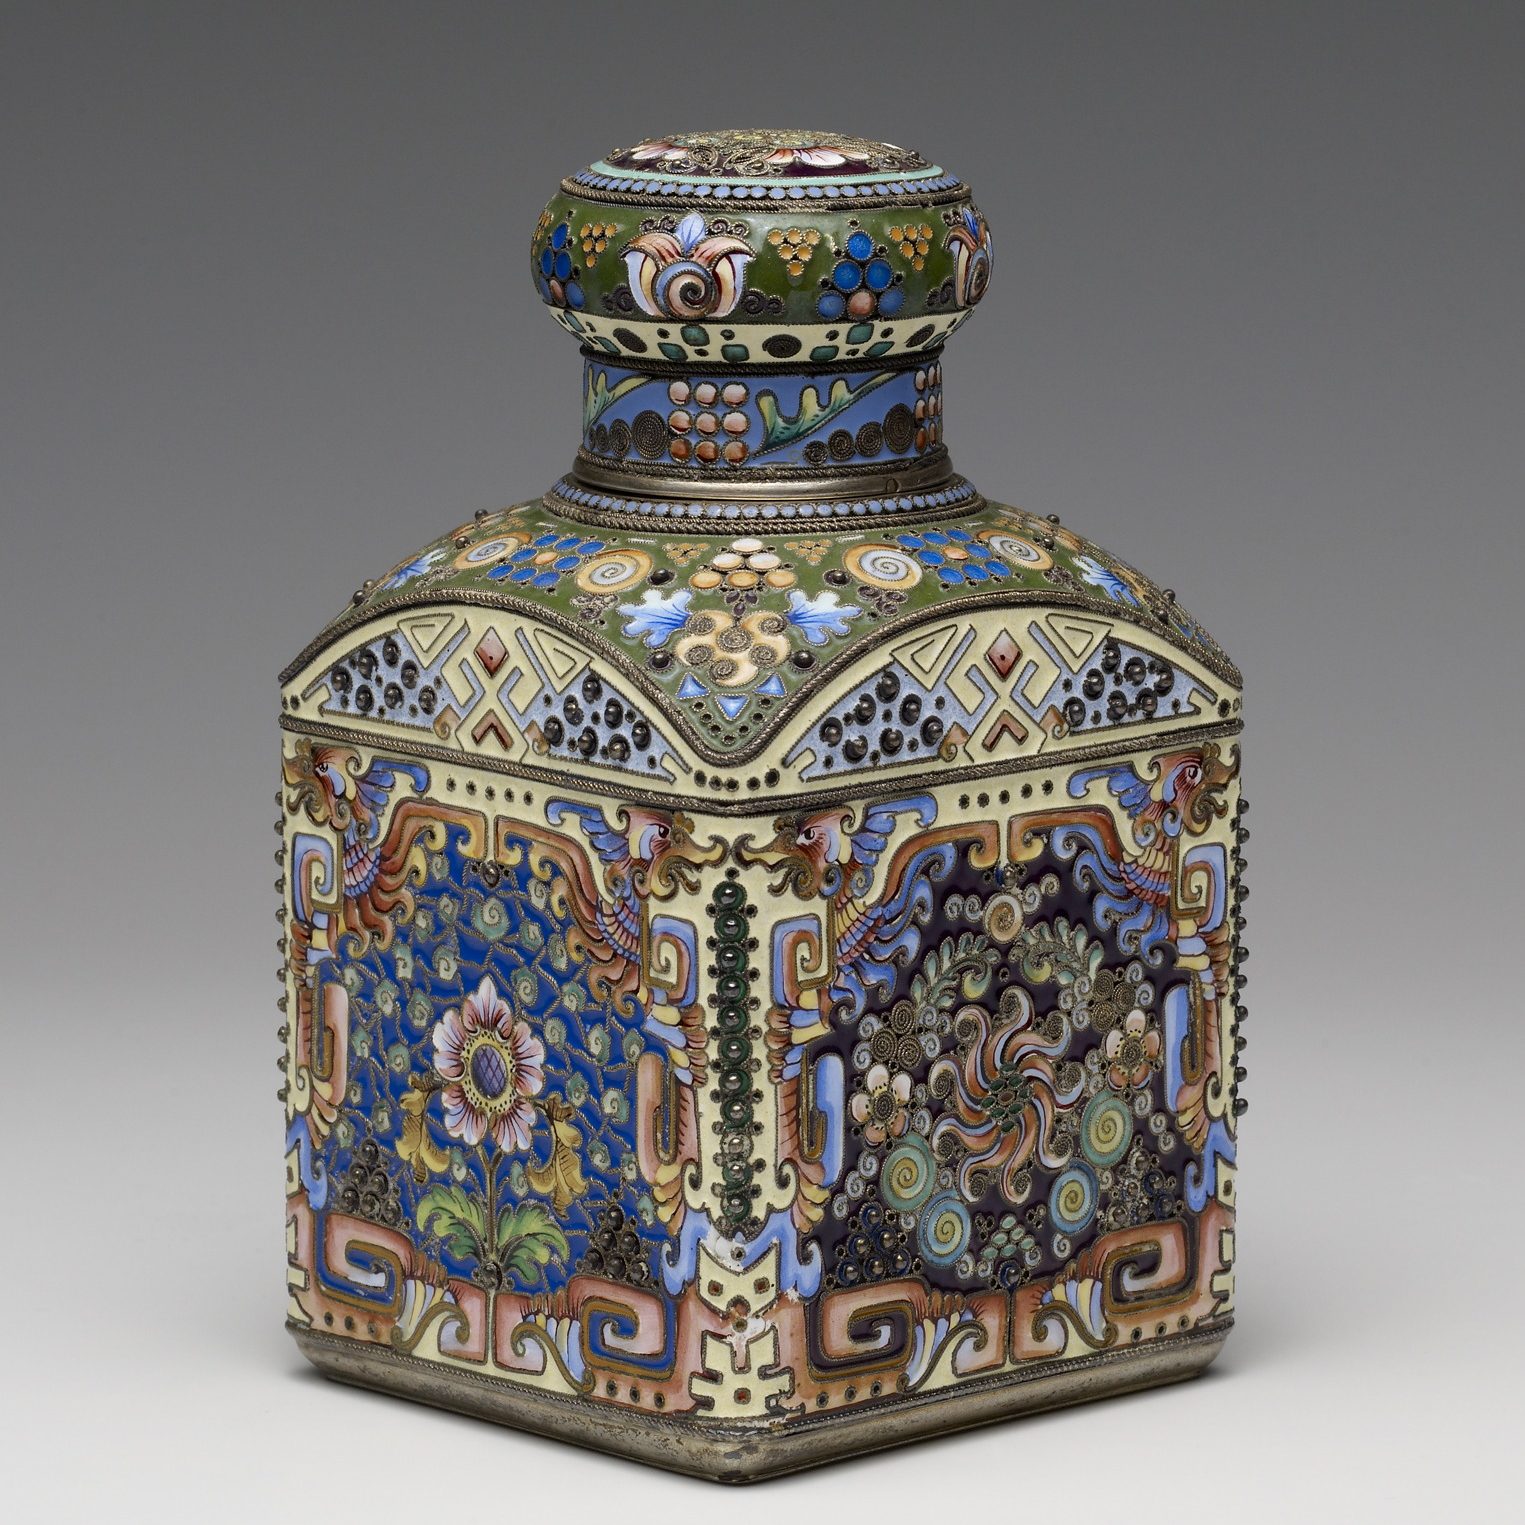 Coffee Caddy with Chinese-inspired decoration by 11th Artel. Silver enamel.